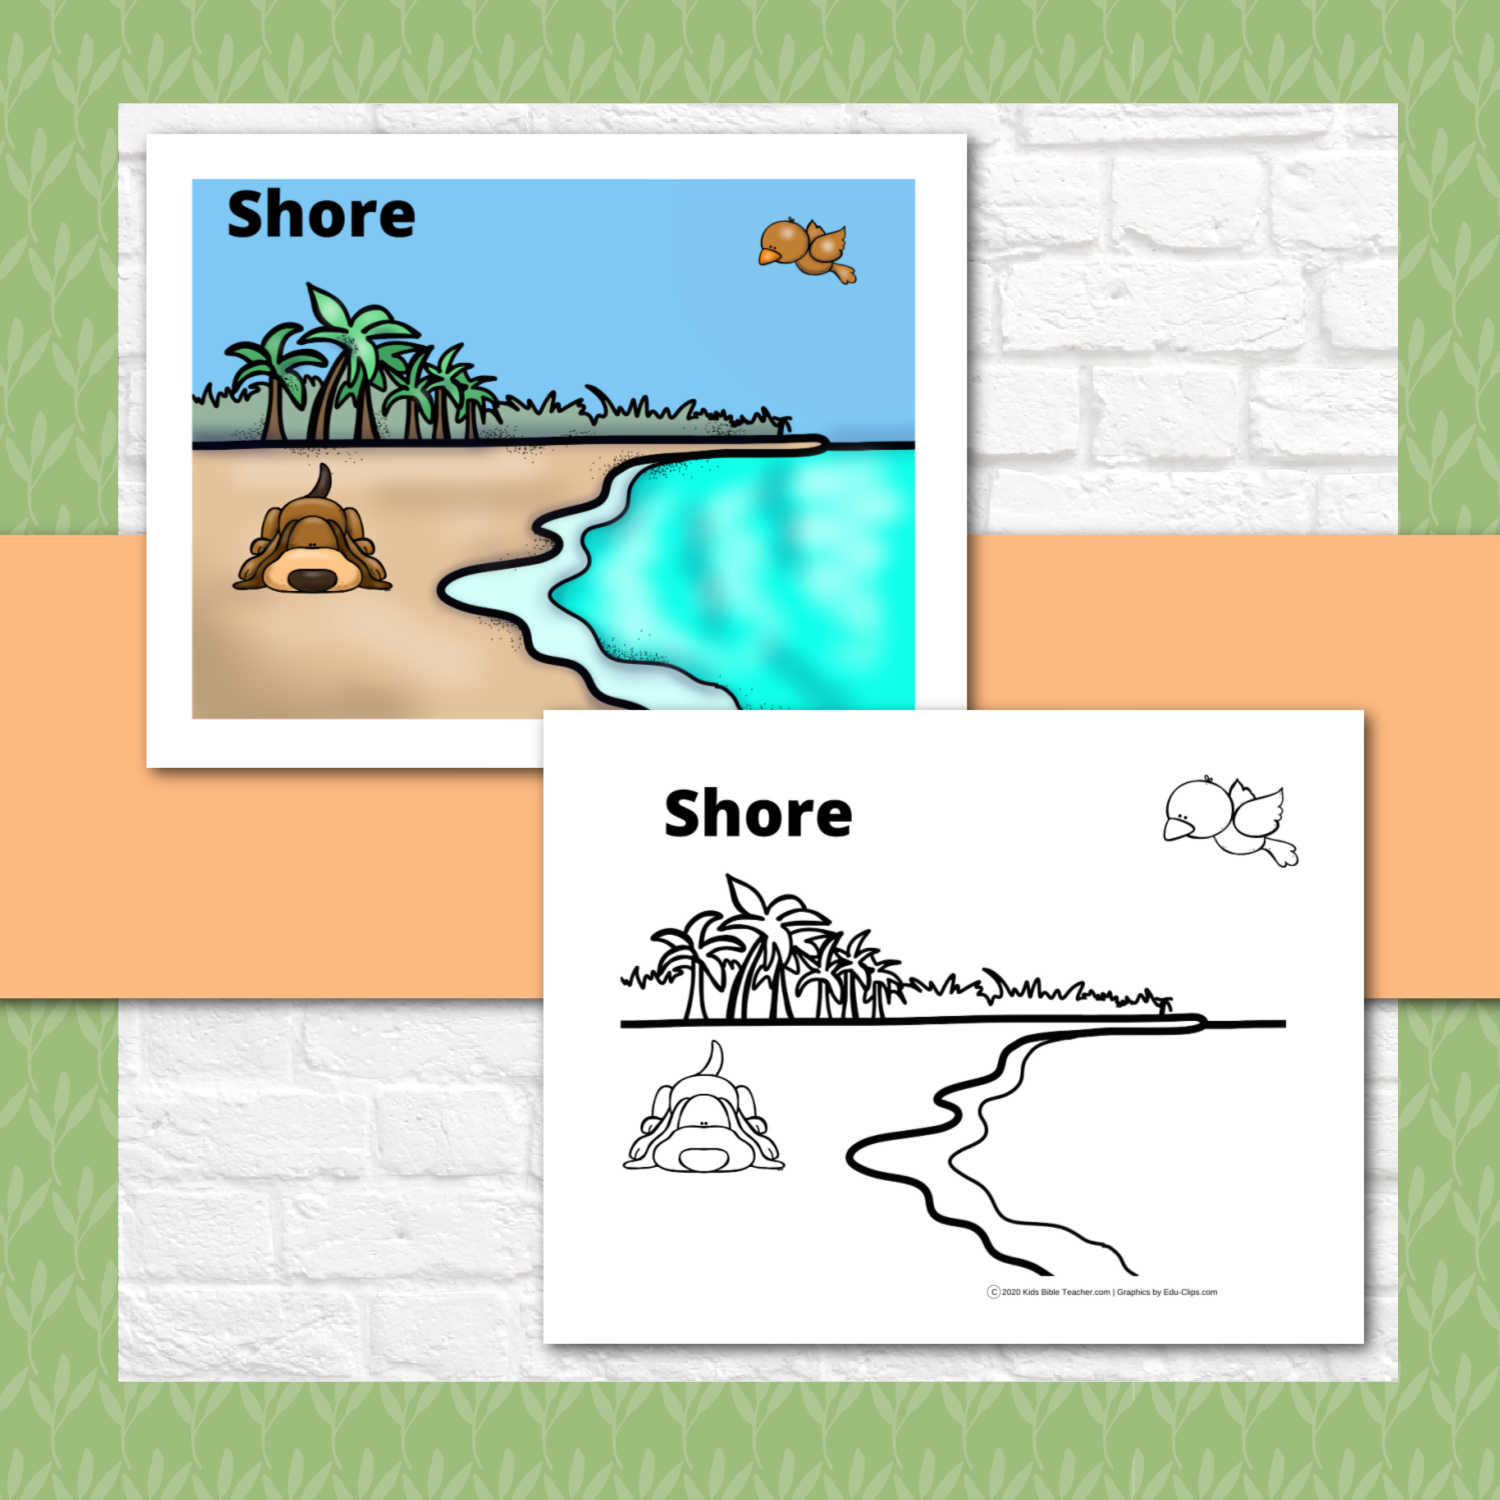 Lesson Review Game - Island, Ocean, Shore Bible Review Game for 1st through 4rth Grade